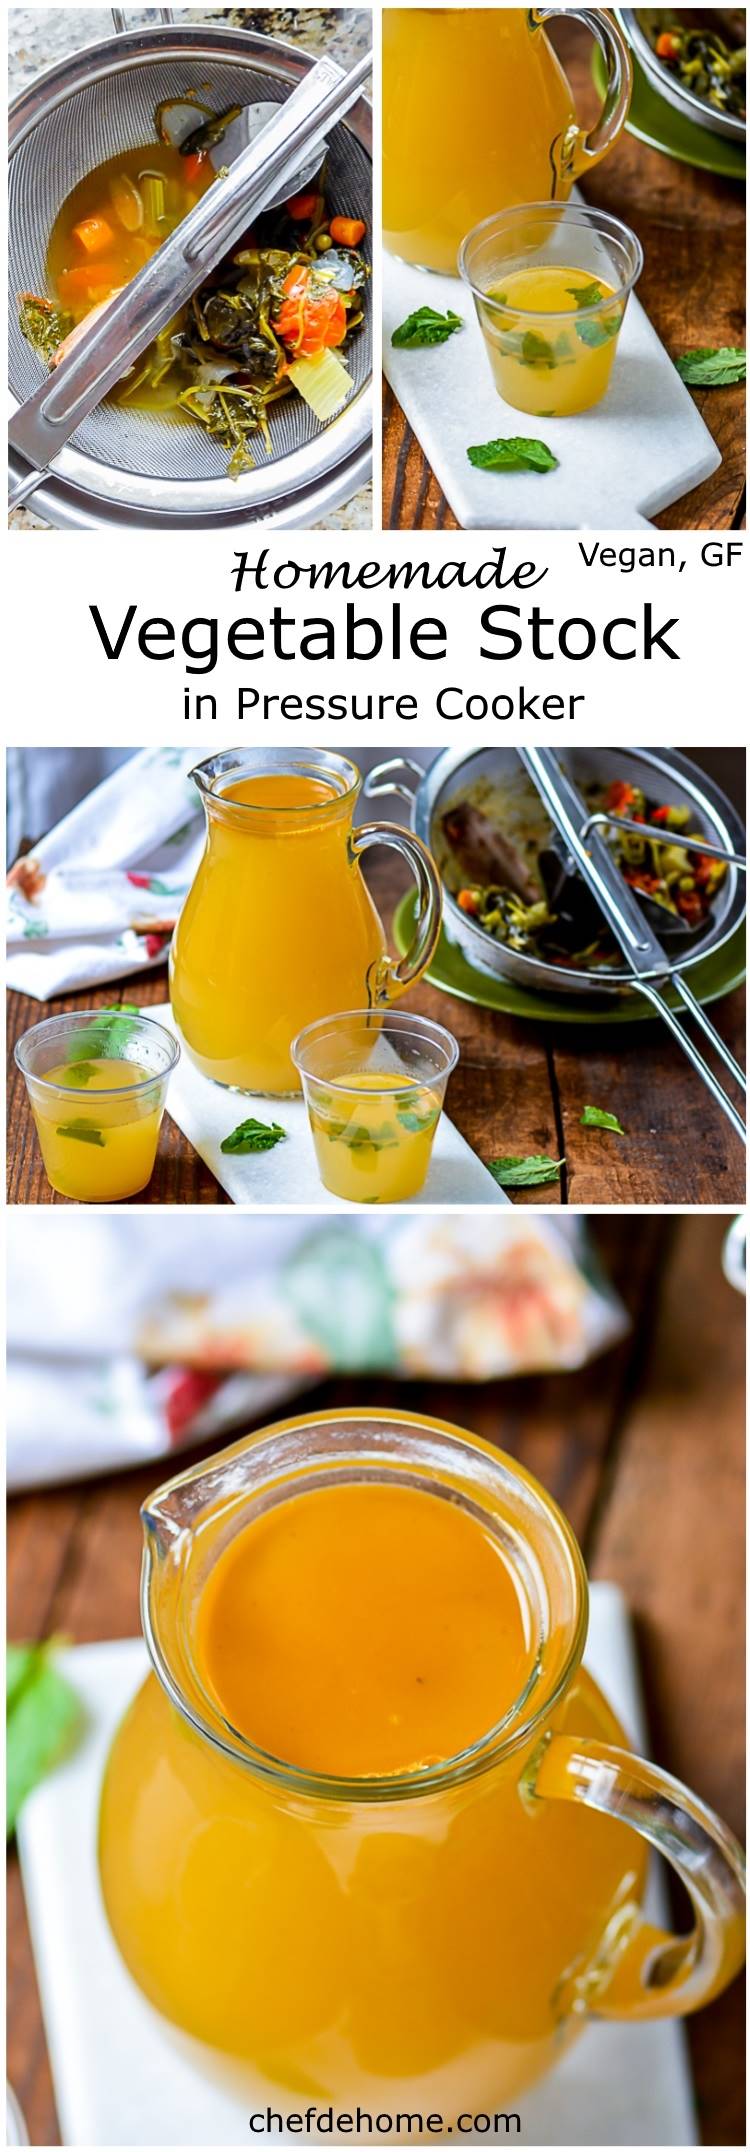 Homemade Vegan Vegetable Stock cooked in just 20 minutes in pressure cooker. Perfect to flavor soup and great health toniic with low sodium and almost negligible fat | chefdehome.com